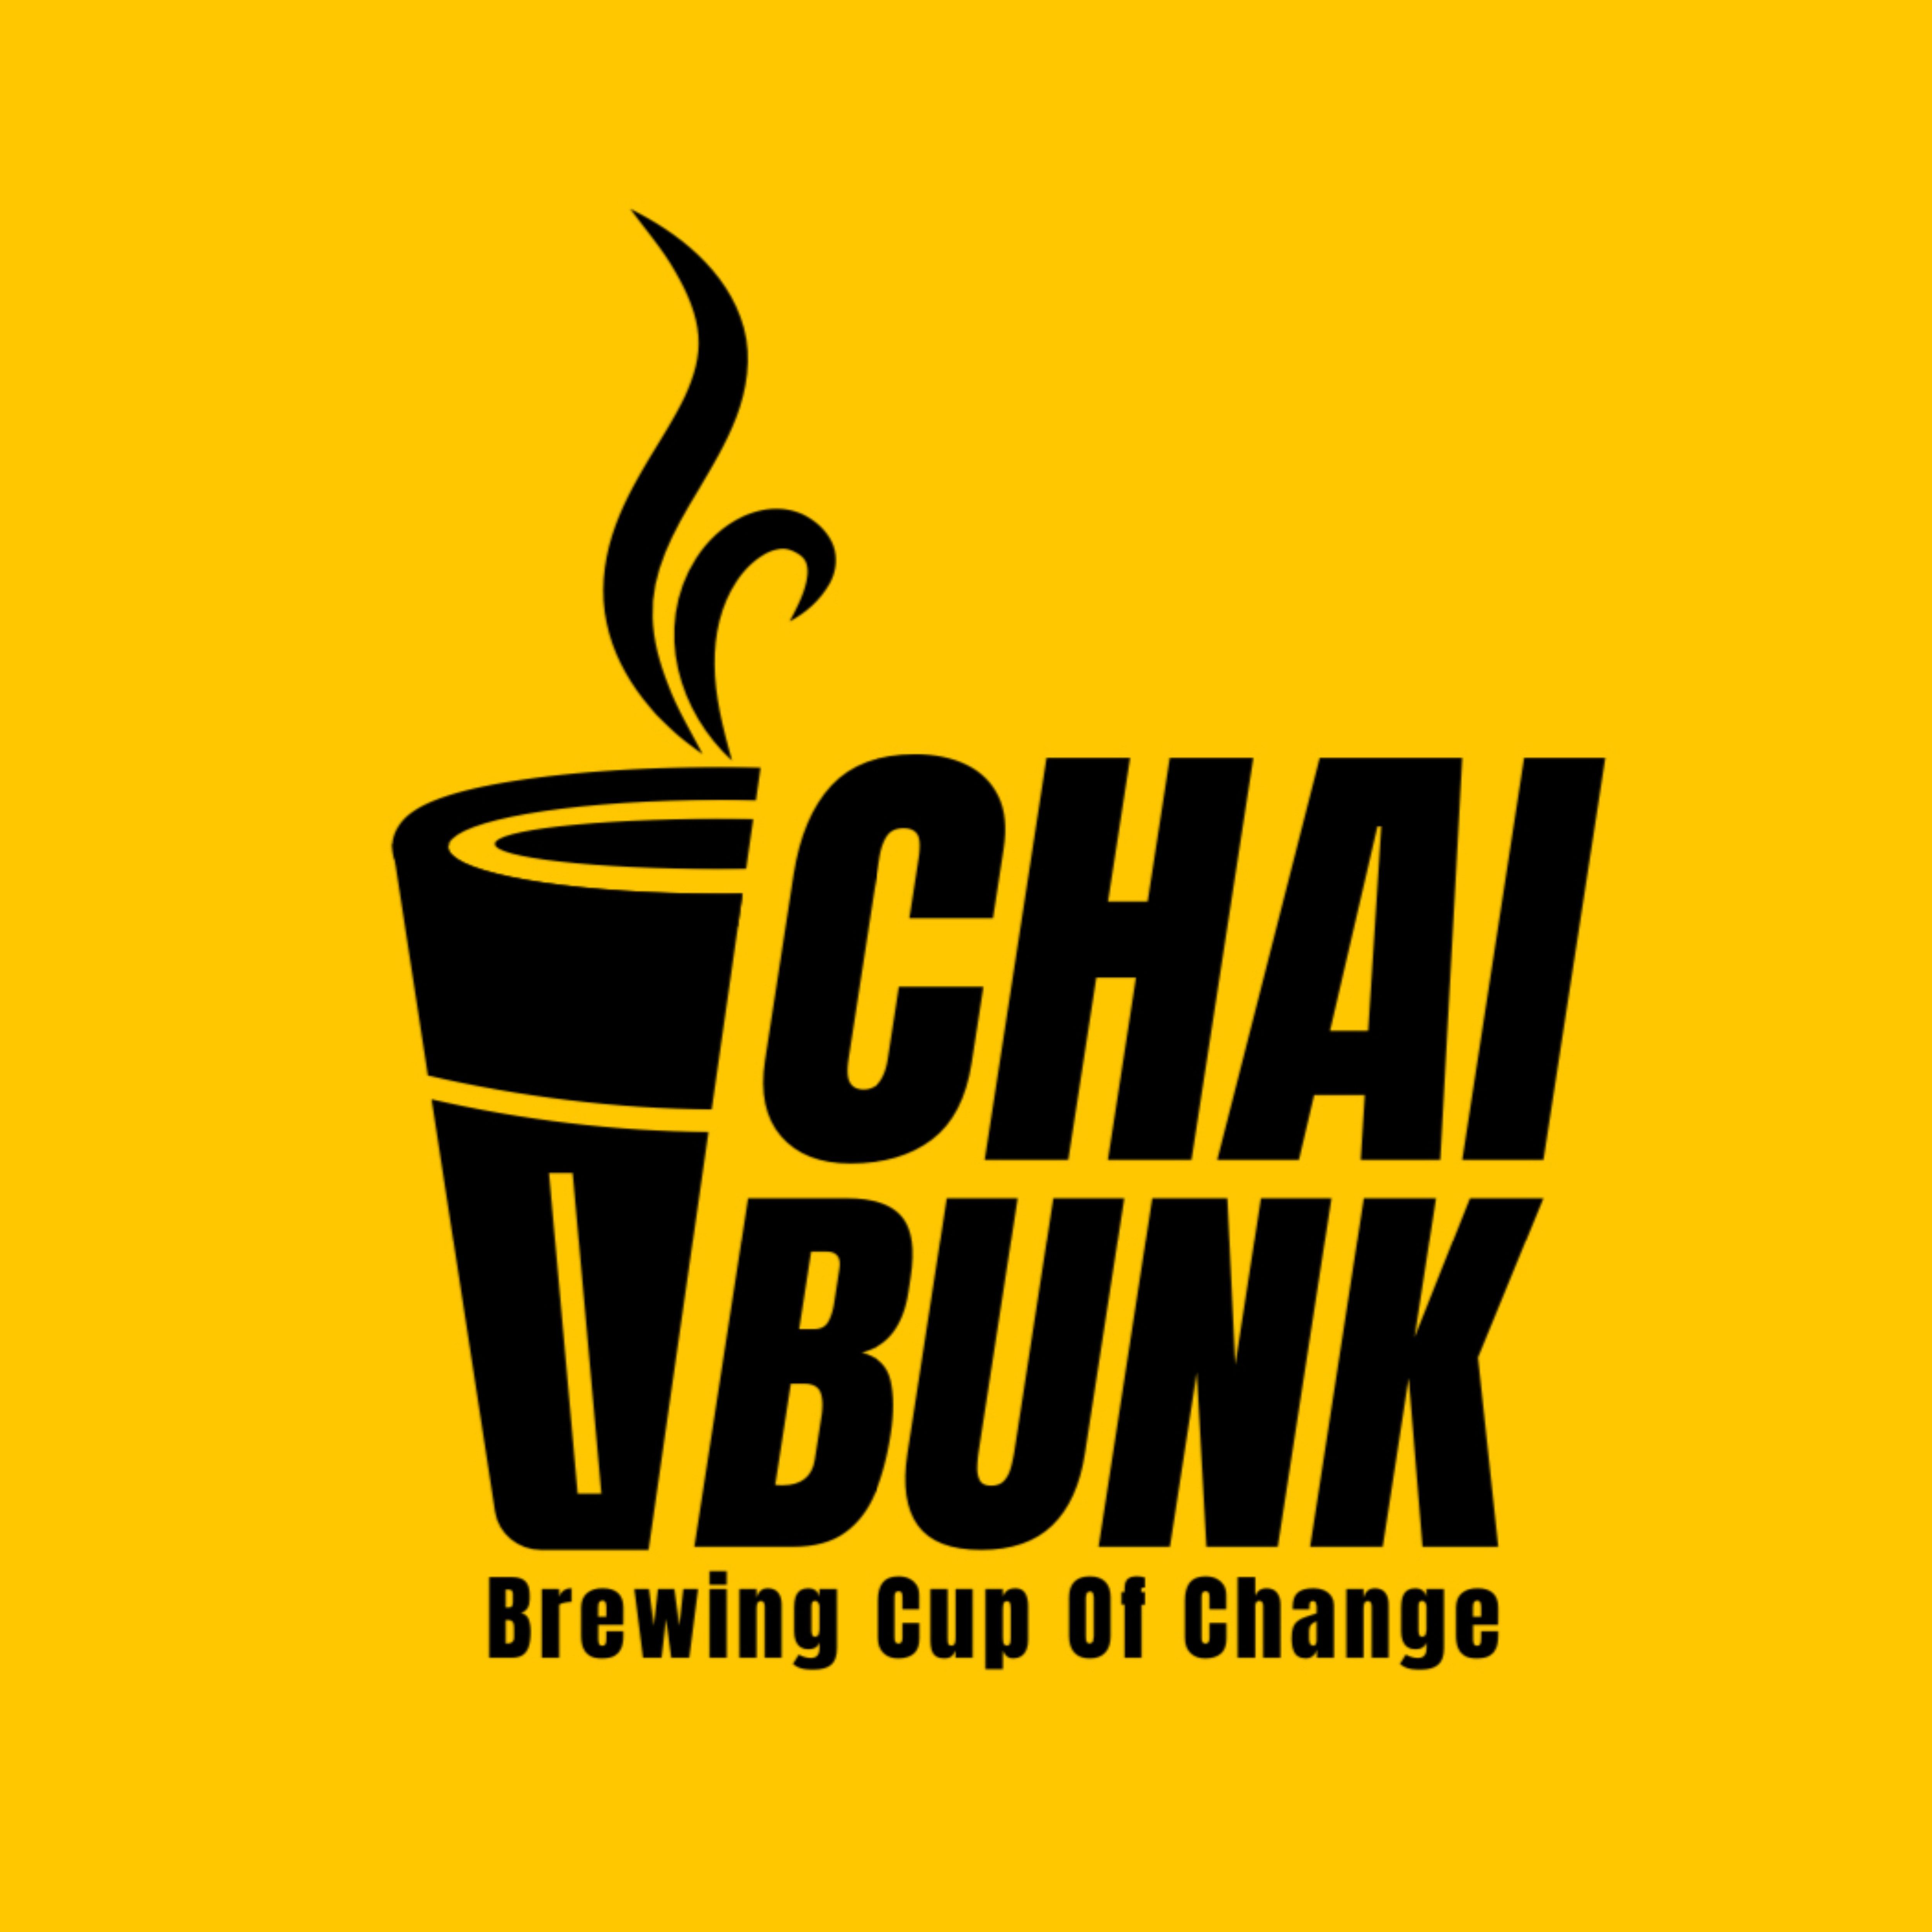 Chai cup Stock Vector Images - Alamy